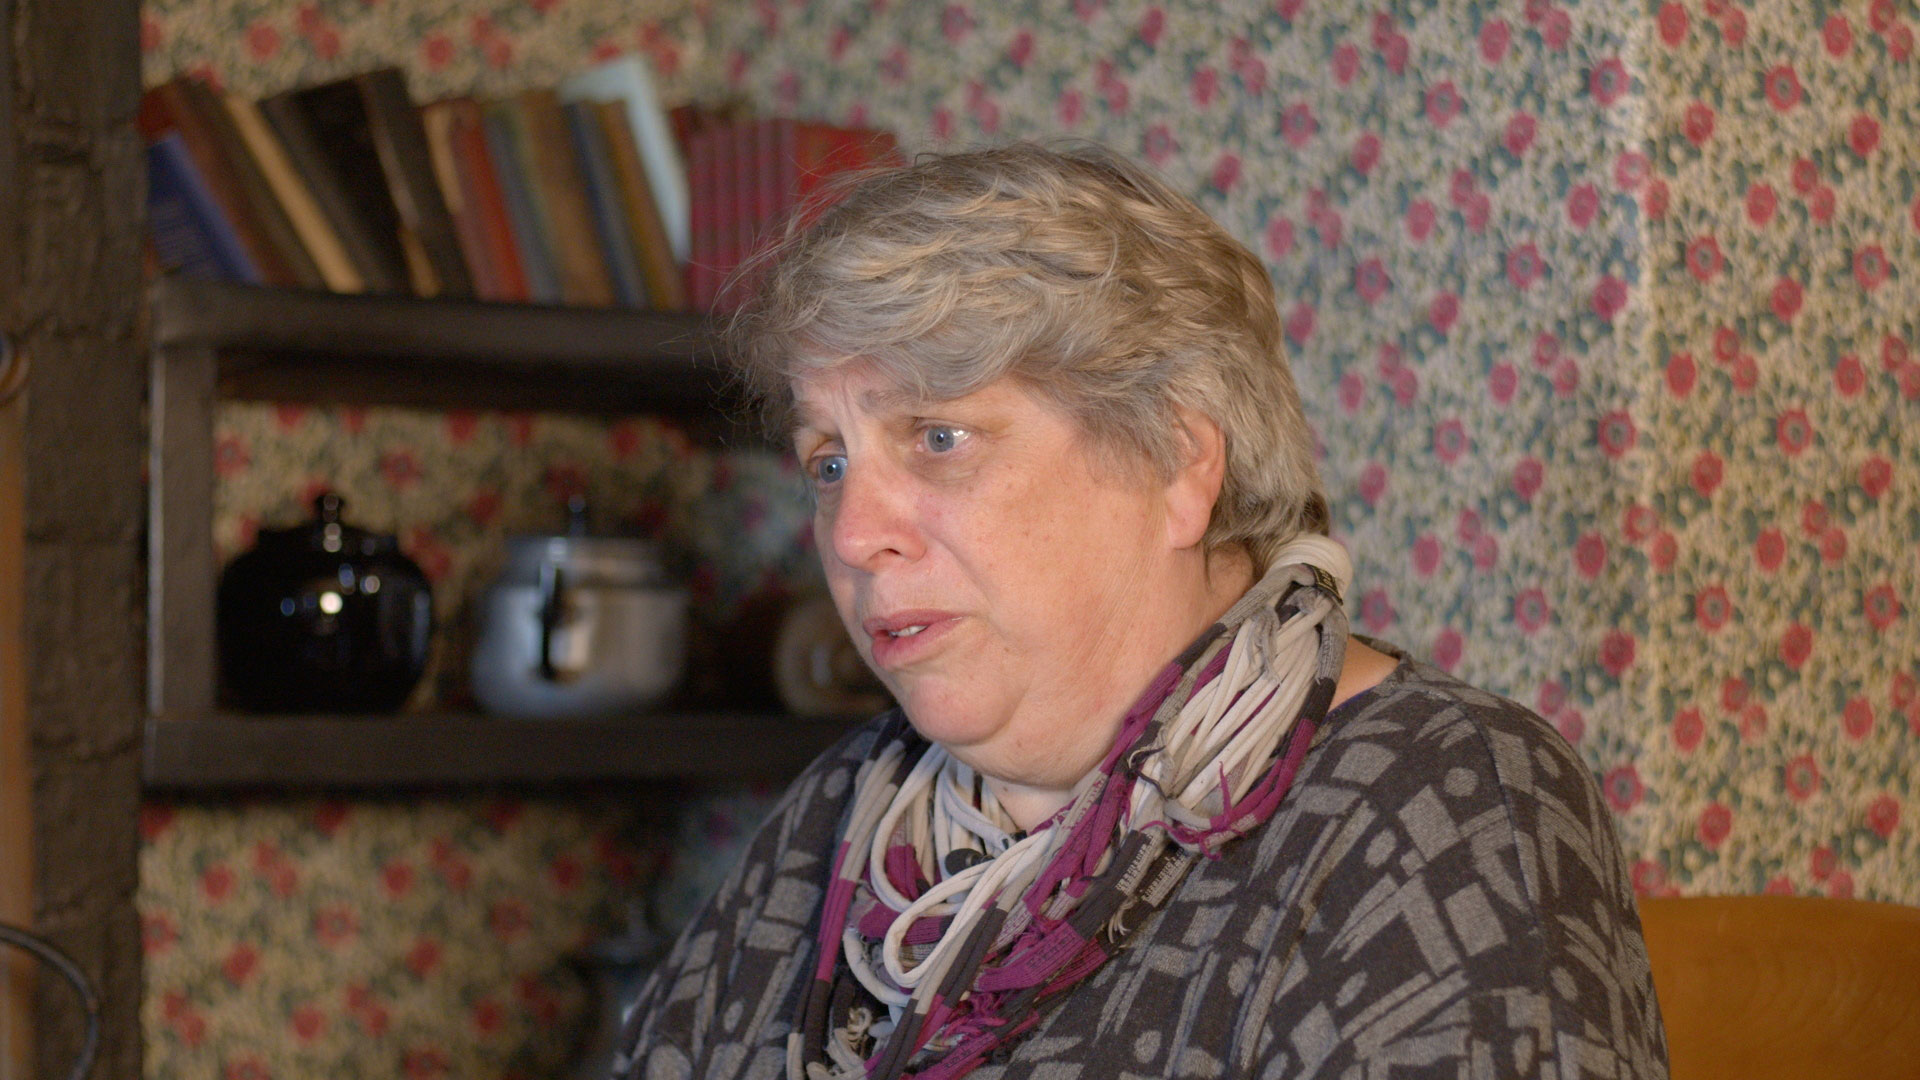 A still from a video of Mair Tomos Ifans reciting a story at Yr Ysgwrn.